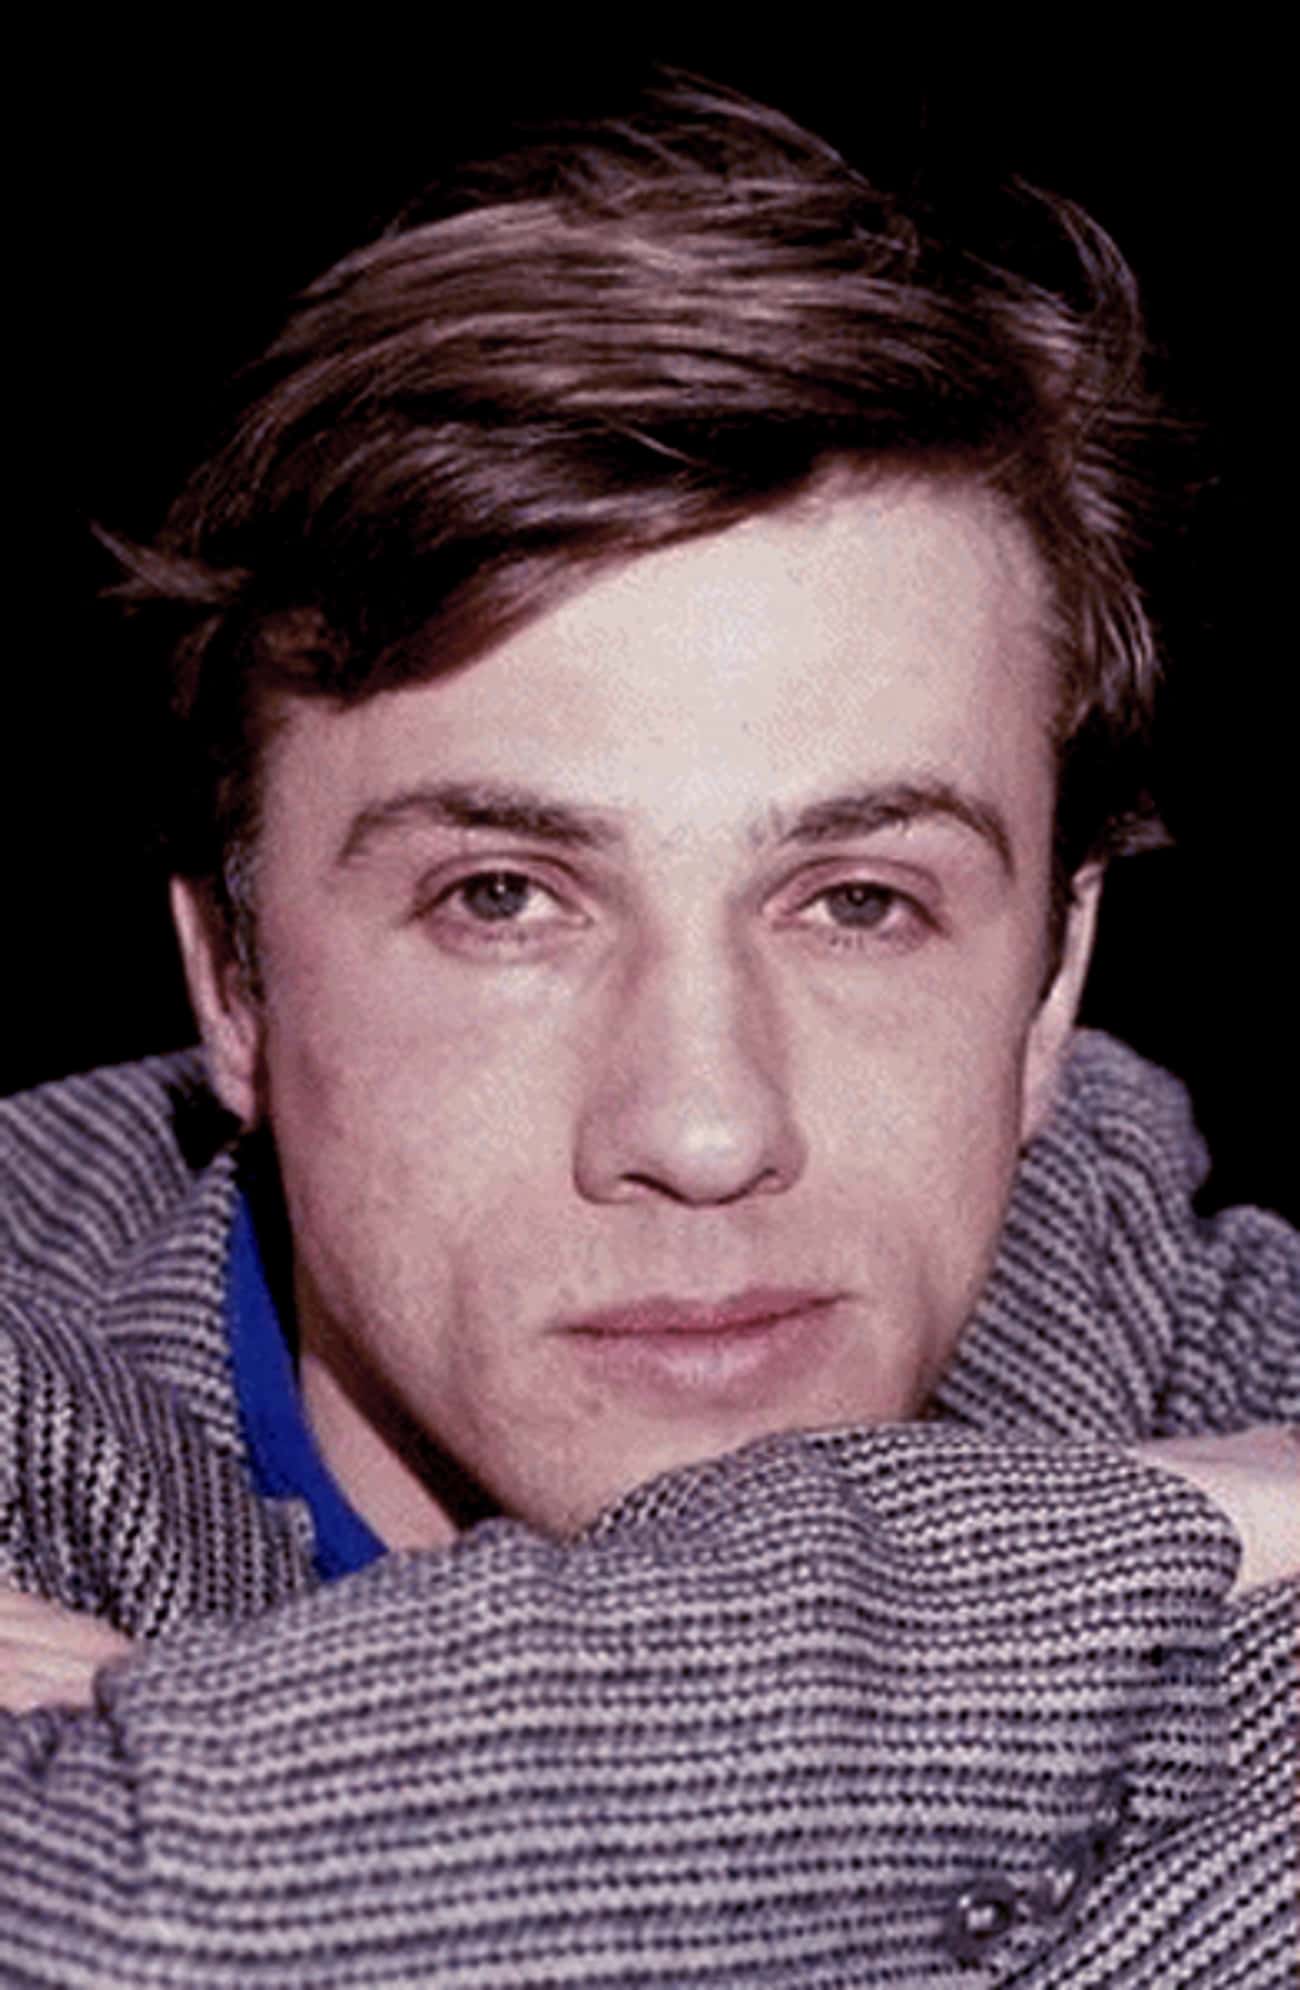 Young Christoph Waltz in Striped Sports Coat Closeup